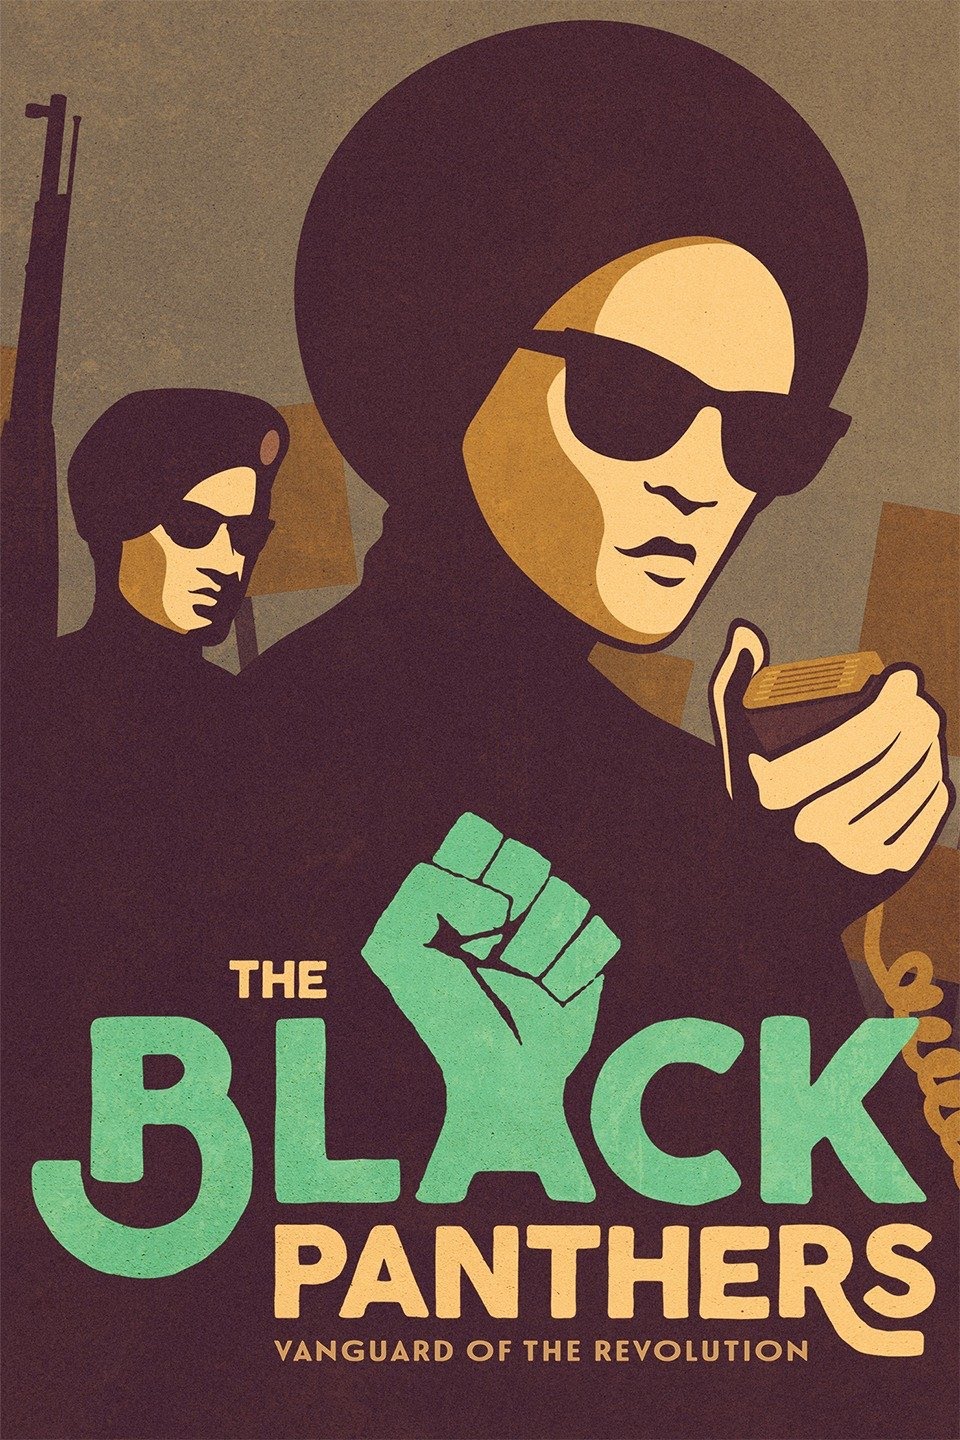 The Black Panthers: Vanguard of the Revolution directed by Stanley Nelson